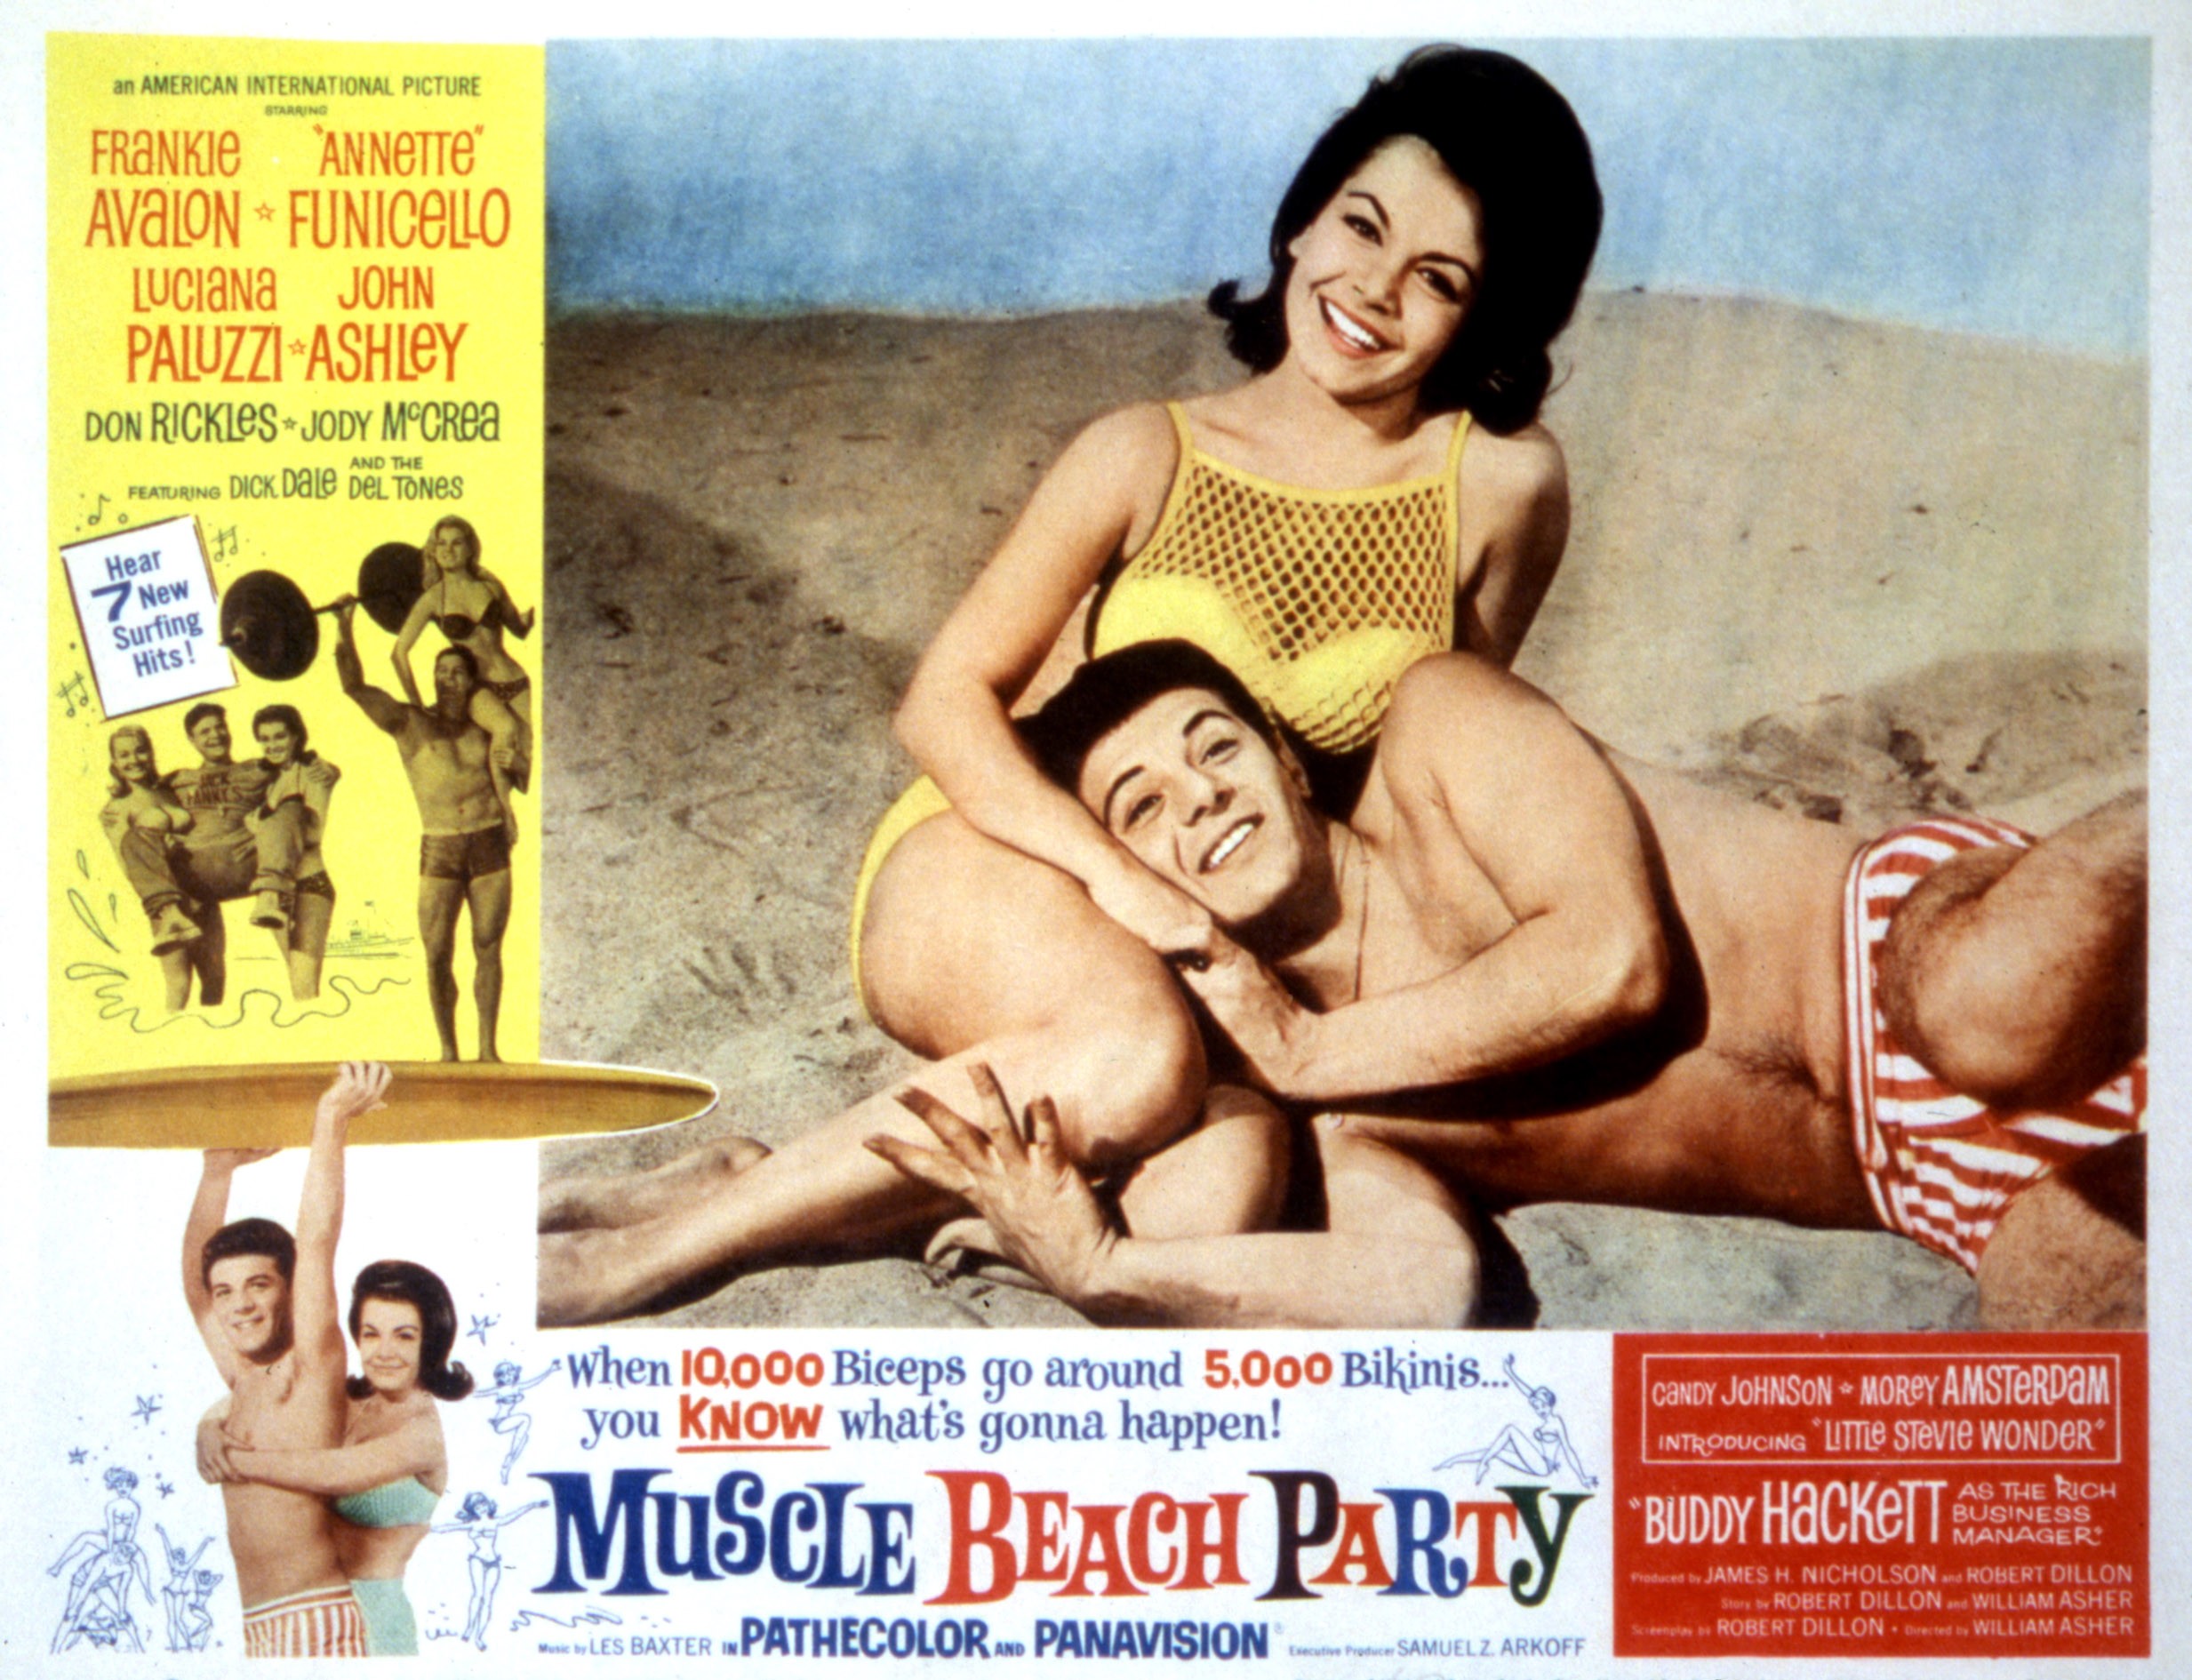 A poster for "Muscle Beach Party" featuring Frankie Avalon and Annette Funicello circa 1964. | Source: Getty Images